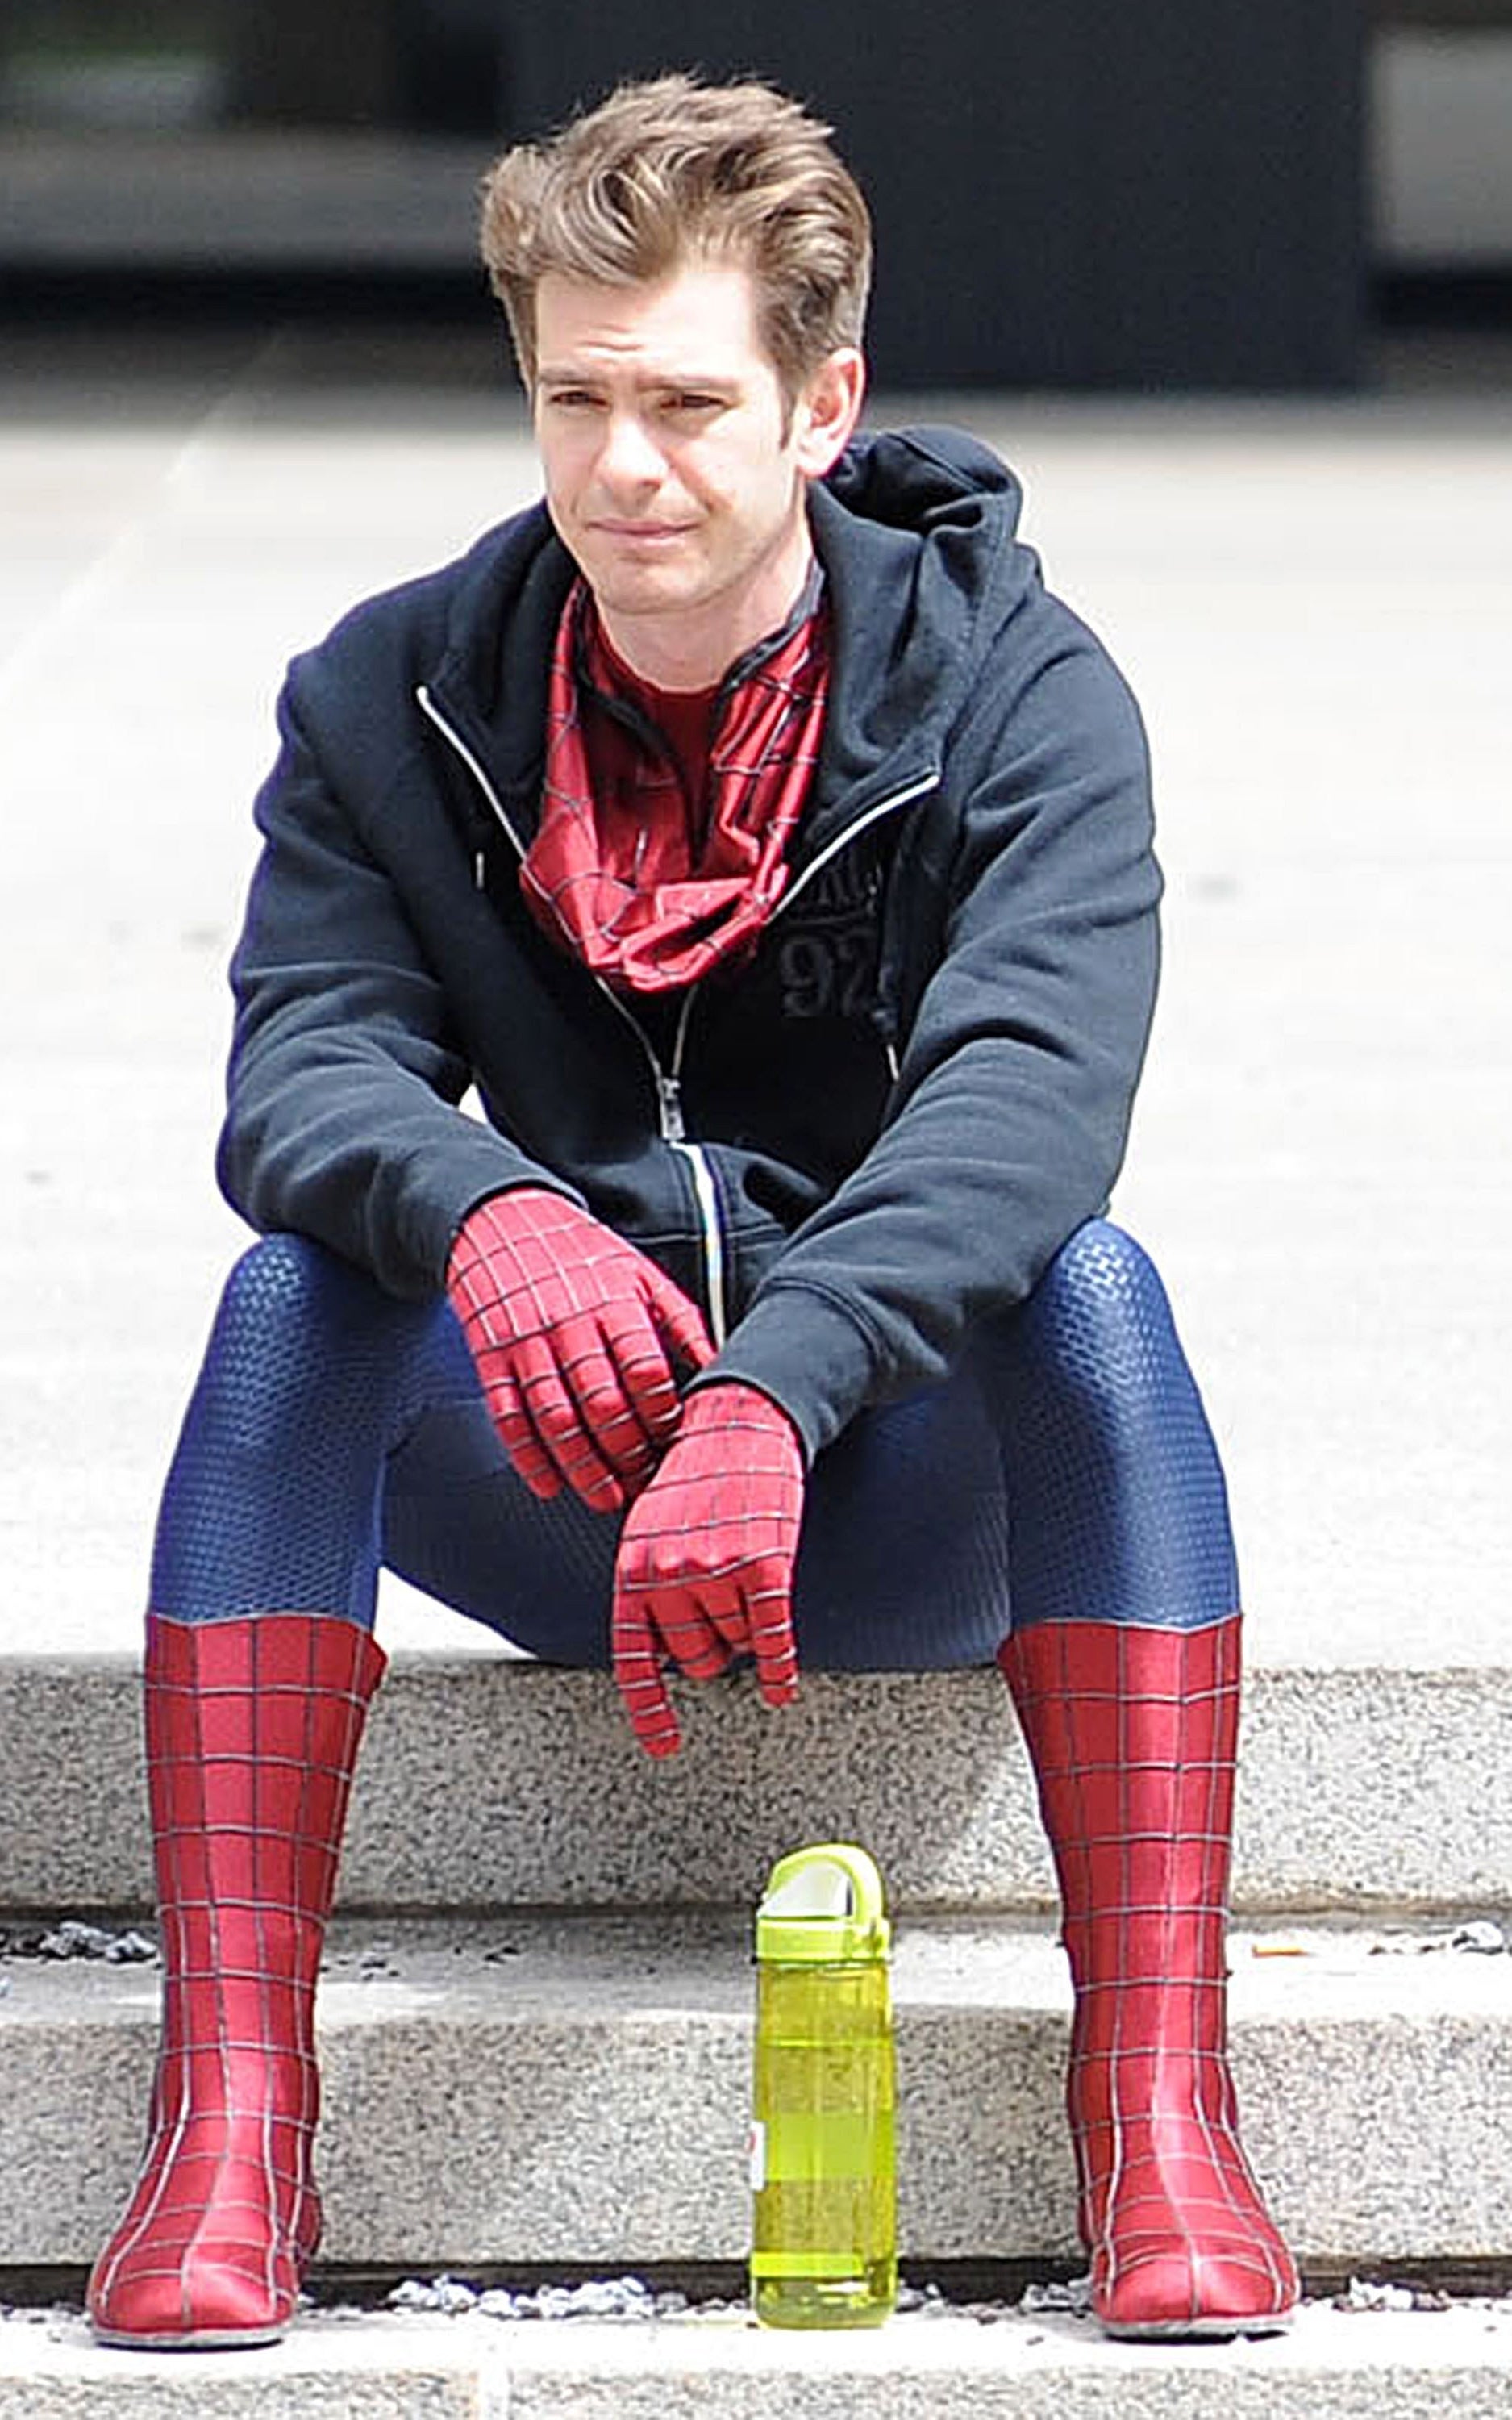 wearing a hoodie over his Spidey suit, Peter sits on the sidewalk